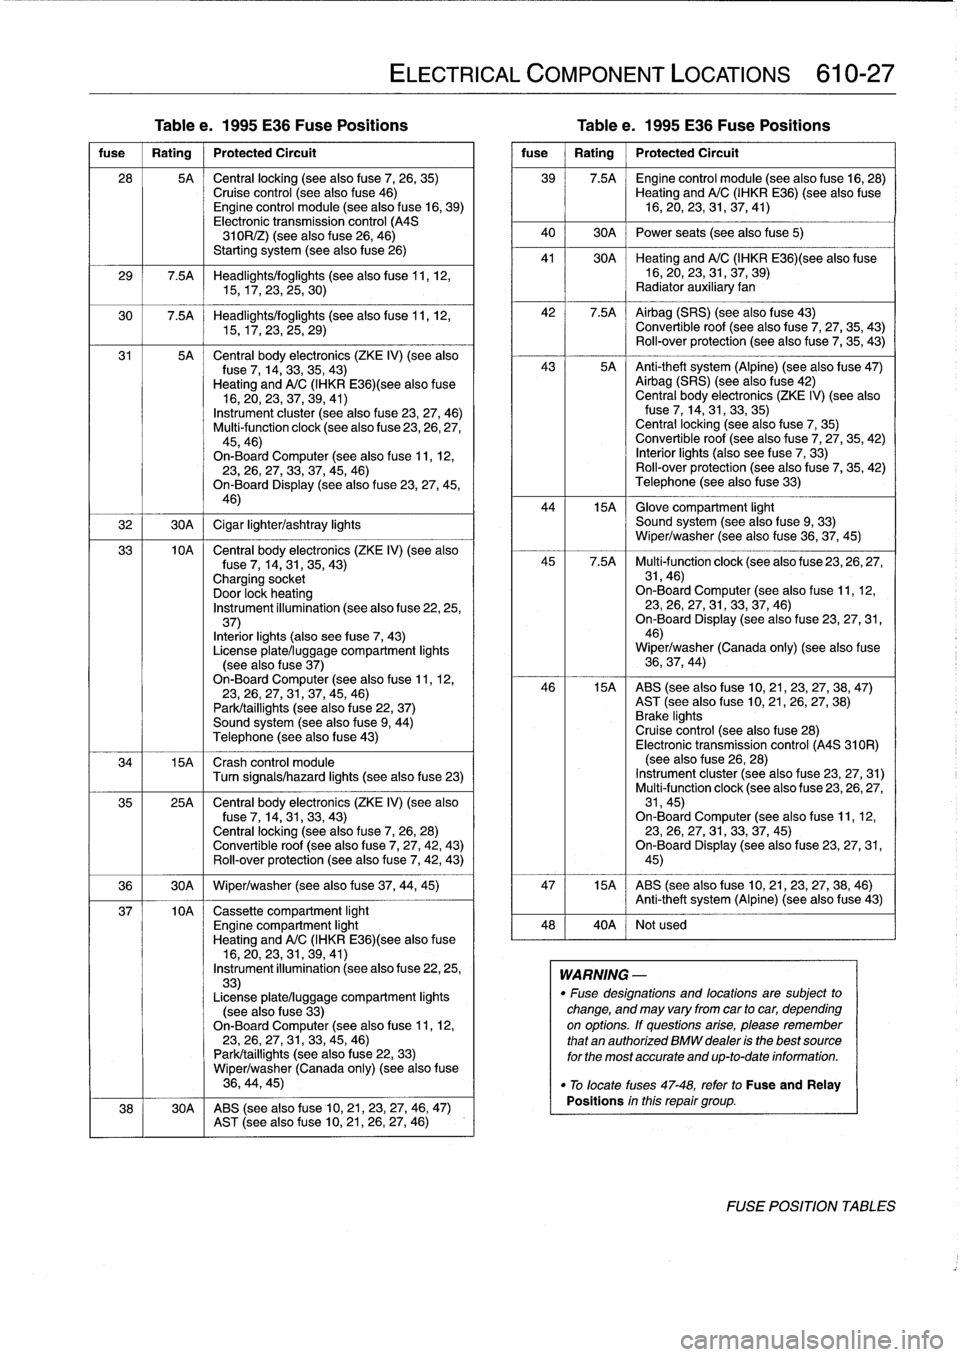 BMW 323i 1996 E36 Workshop Manual Tablee
.
1995
E36
Fuse
Positions

	

Table
e
.
1995
E36
Fuse
Positions

fuse

	

I
Rating

	

1
Protected
Circuit

28

	

5A

	

Central
locking
(see
alsofuse
7,
26,
35)Cruise
control
(see
also
fuse
4